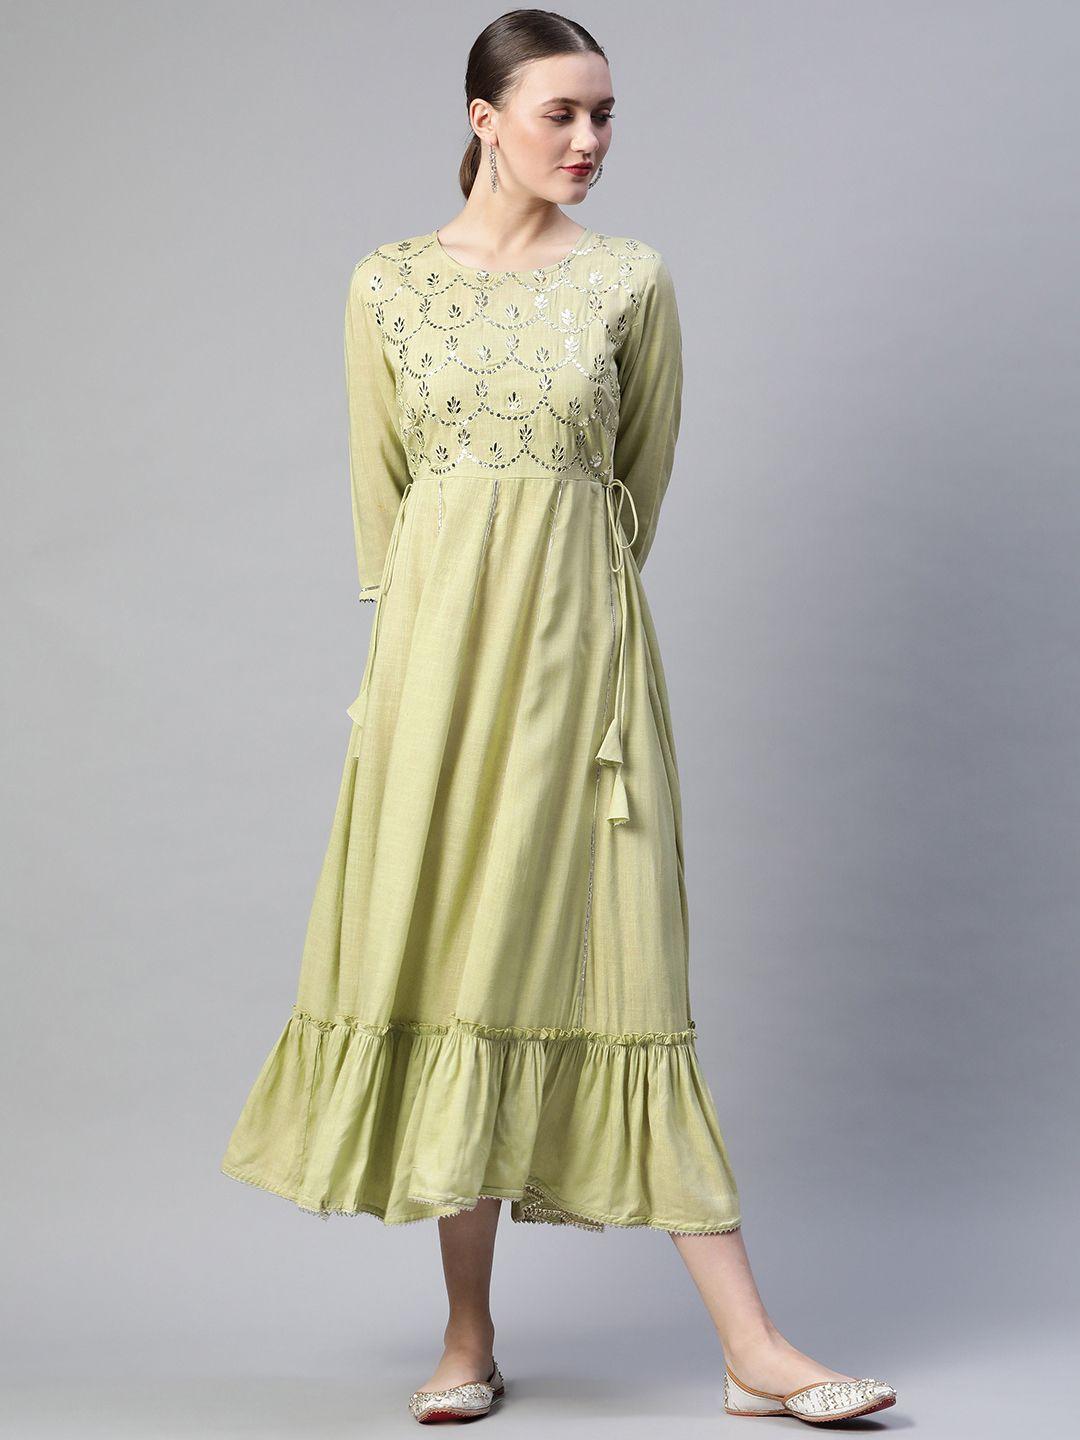 readiprint-fashions-lime-green-&-silver-floral-yoke-embroidered-midi-fit-&-flare-dress